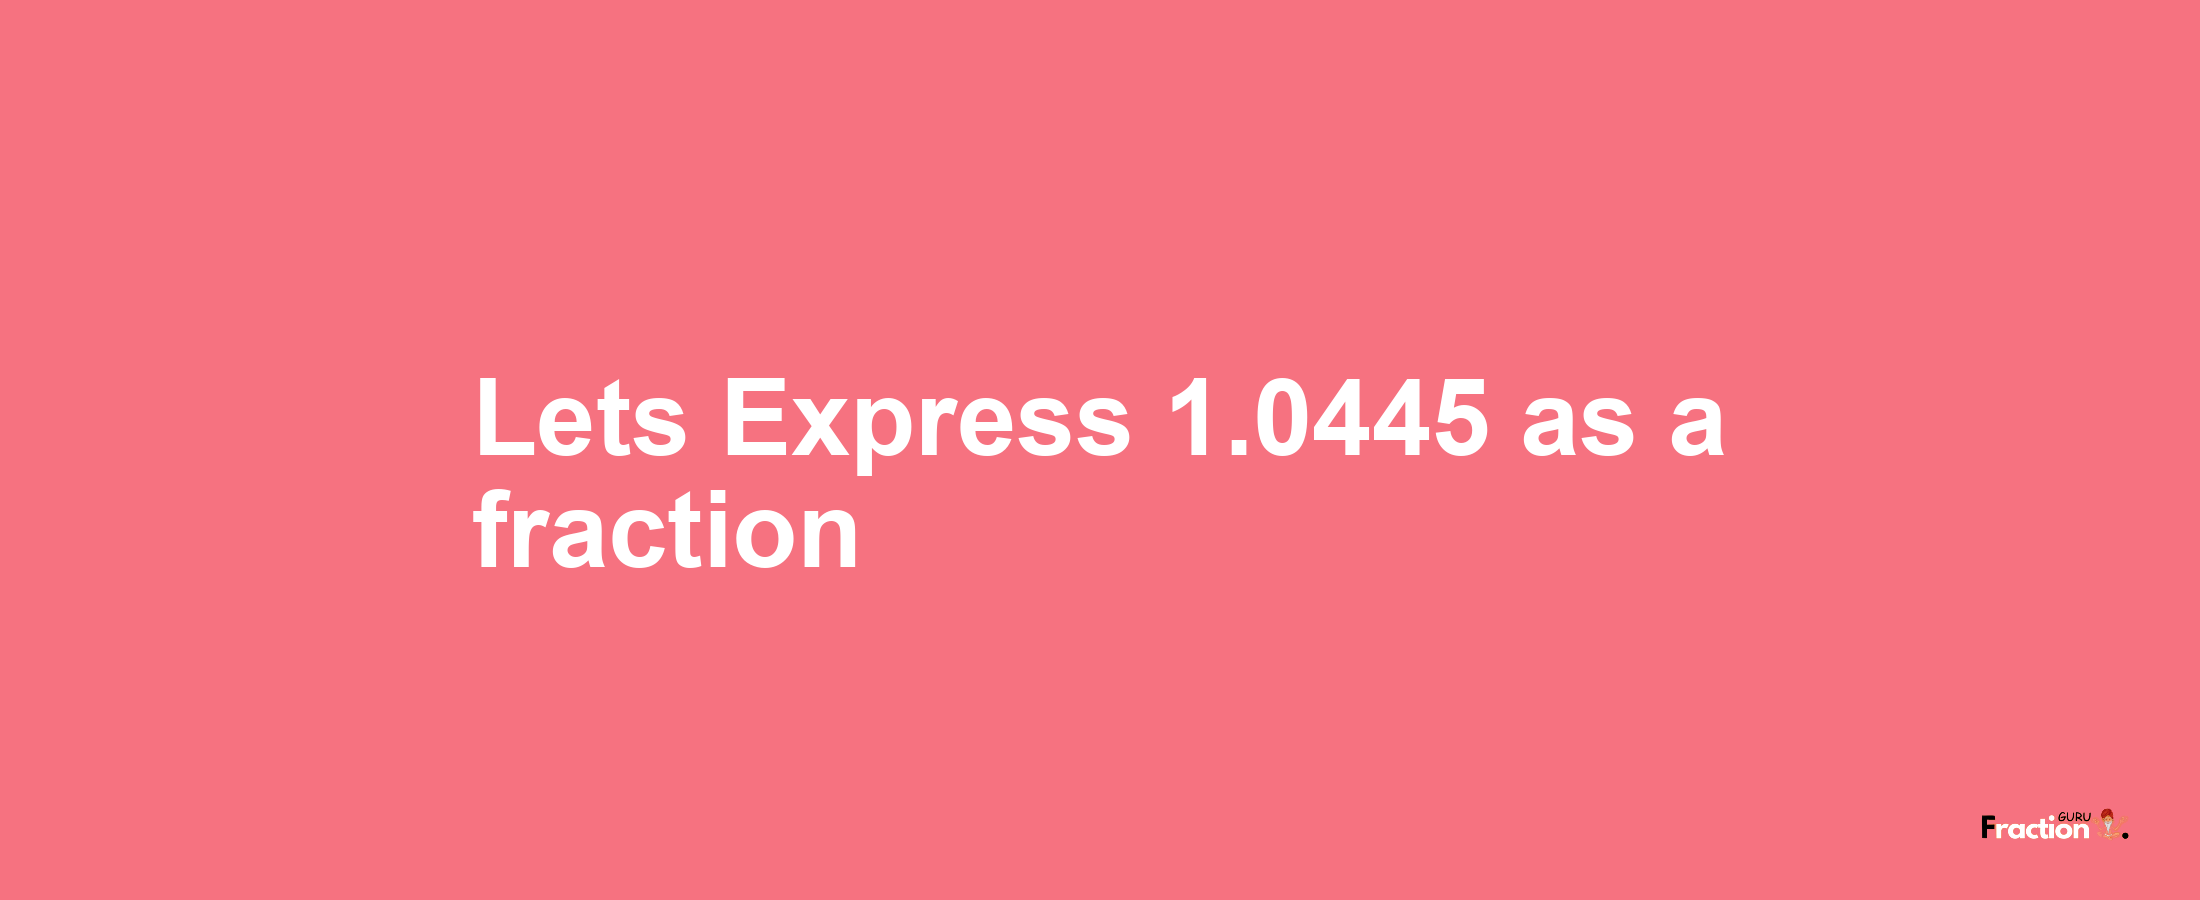 Lets Express 1.0445 as afraction